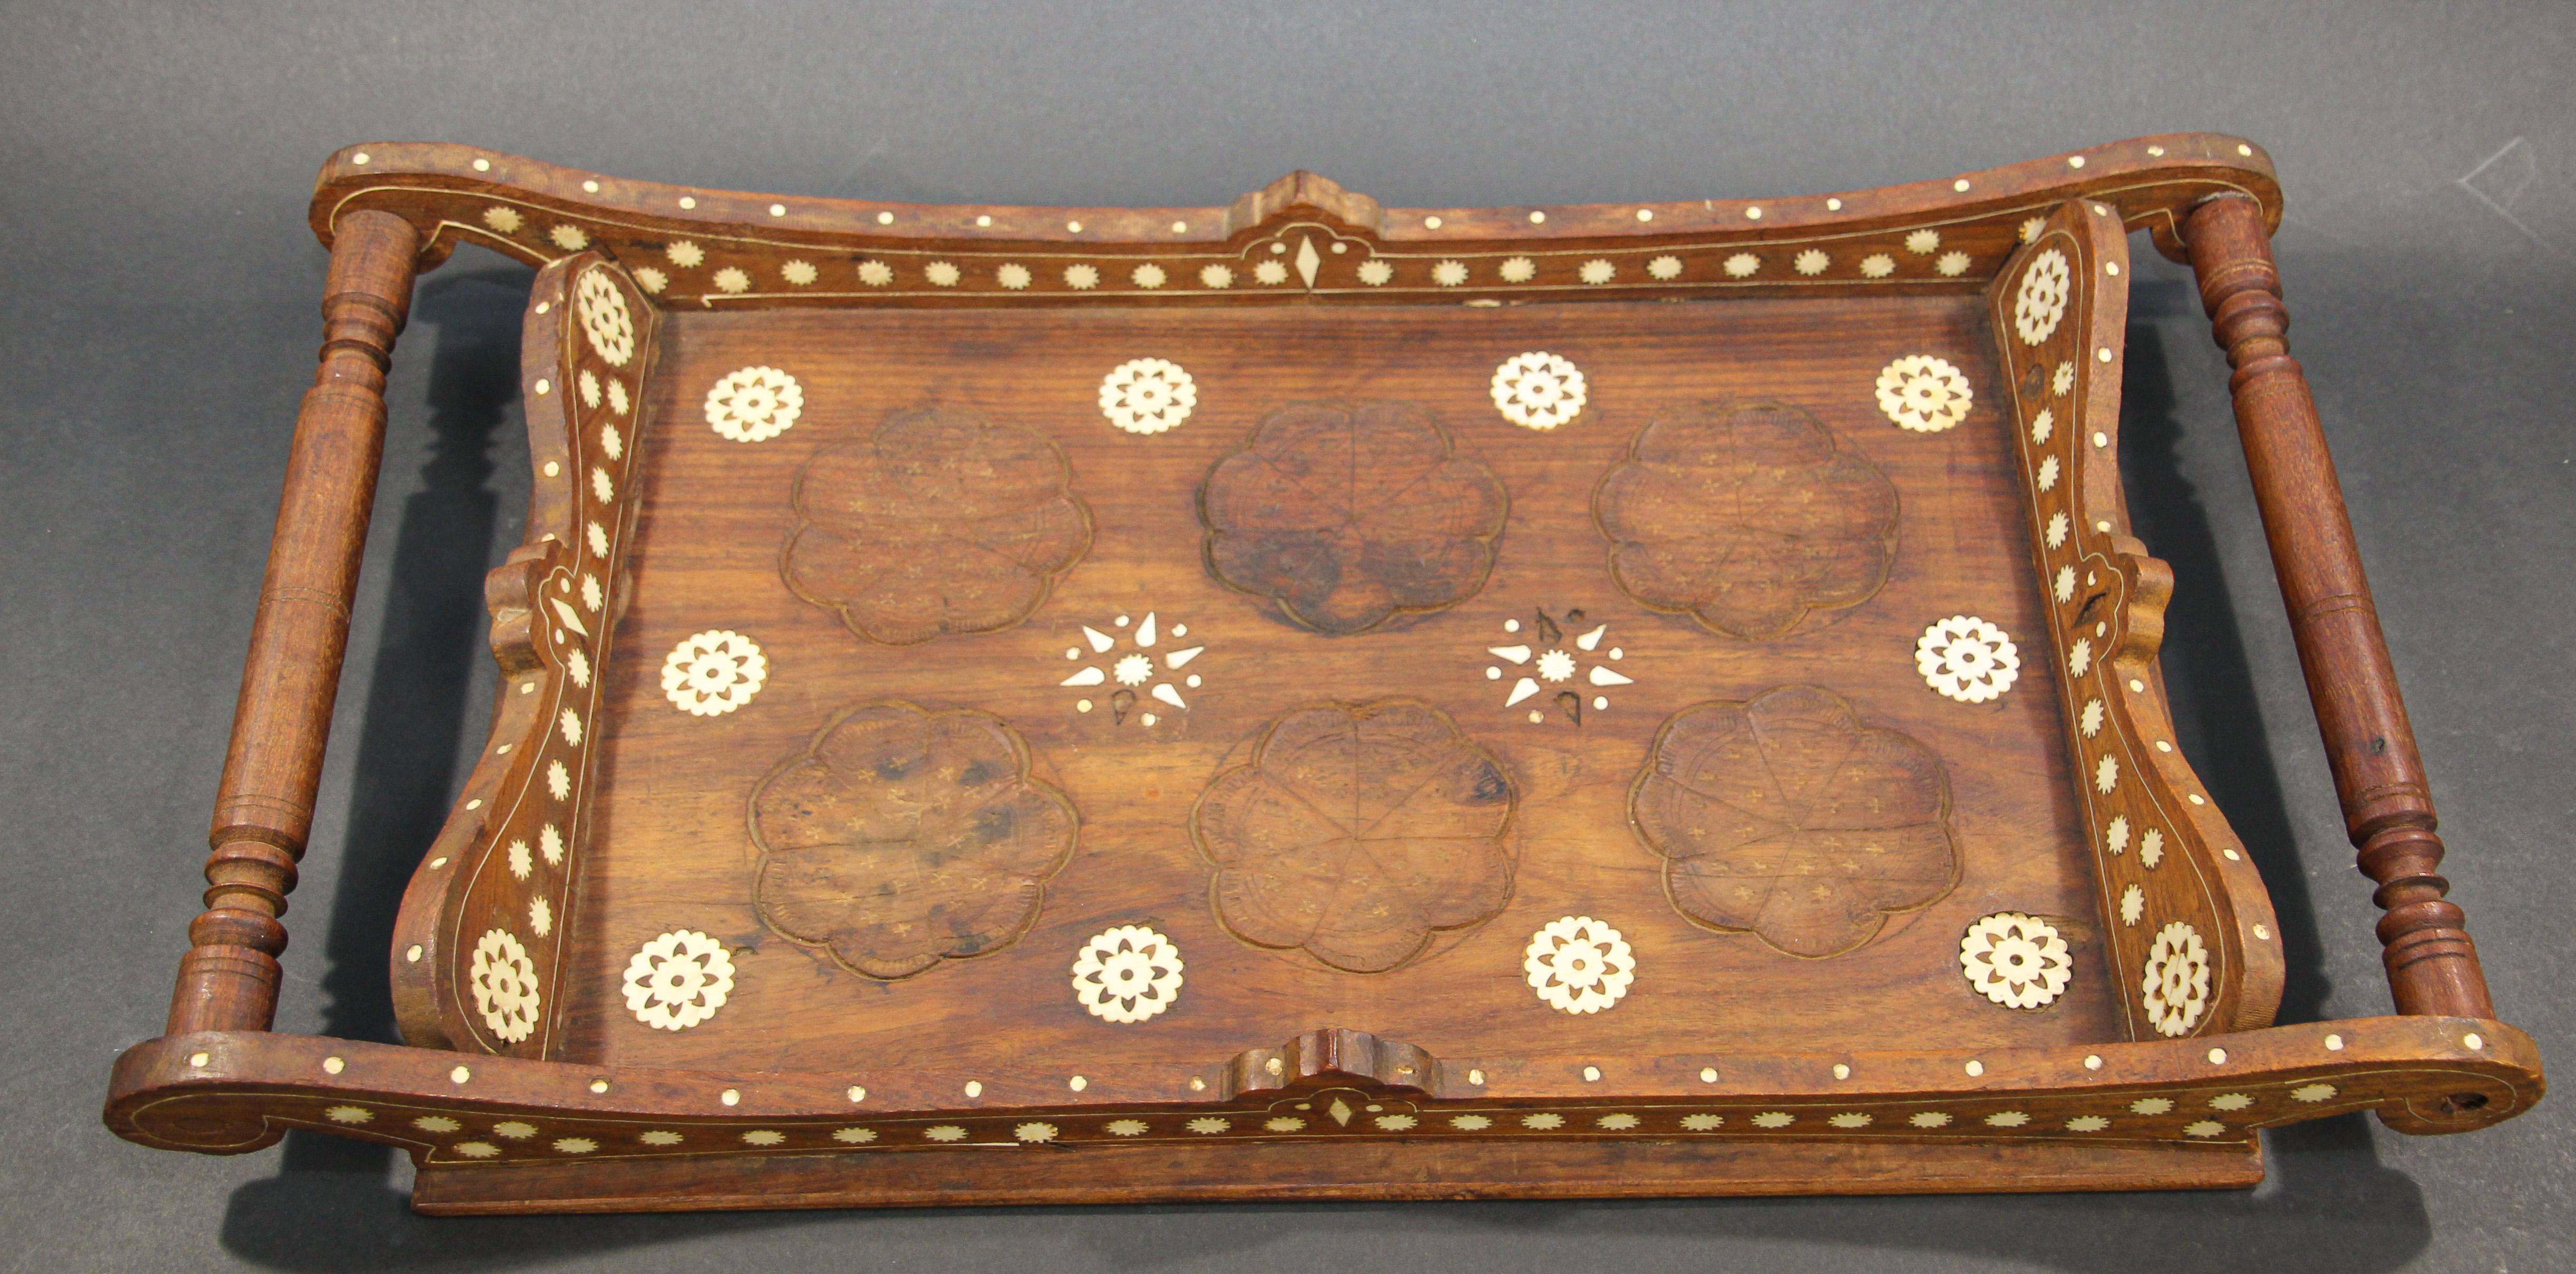 Vintage handcrafted large wood teak and bone inlay in floral motif and geometric hand carved Moorish designs with handles.
Handmade in India.
Measures: Rectangle: 22